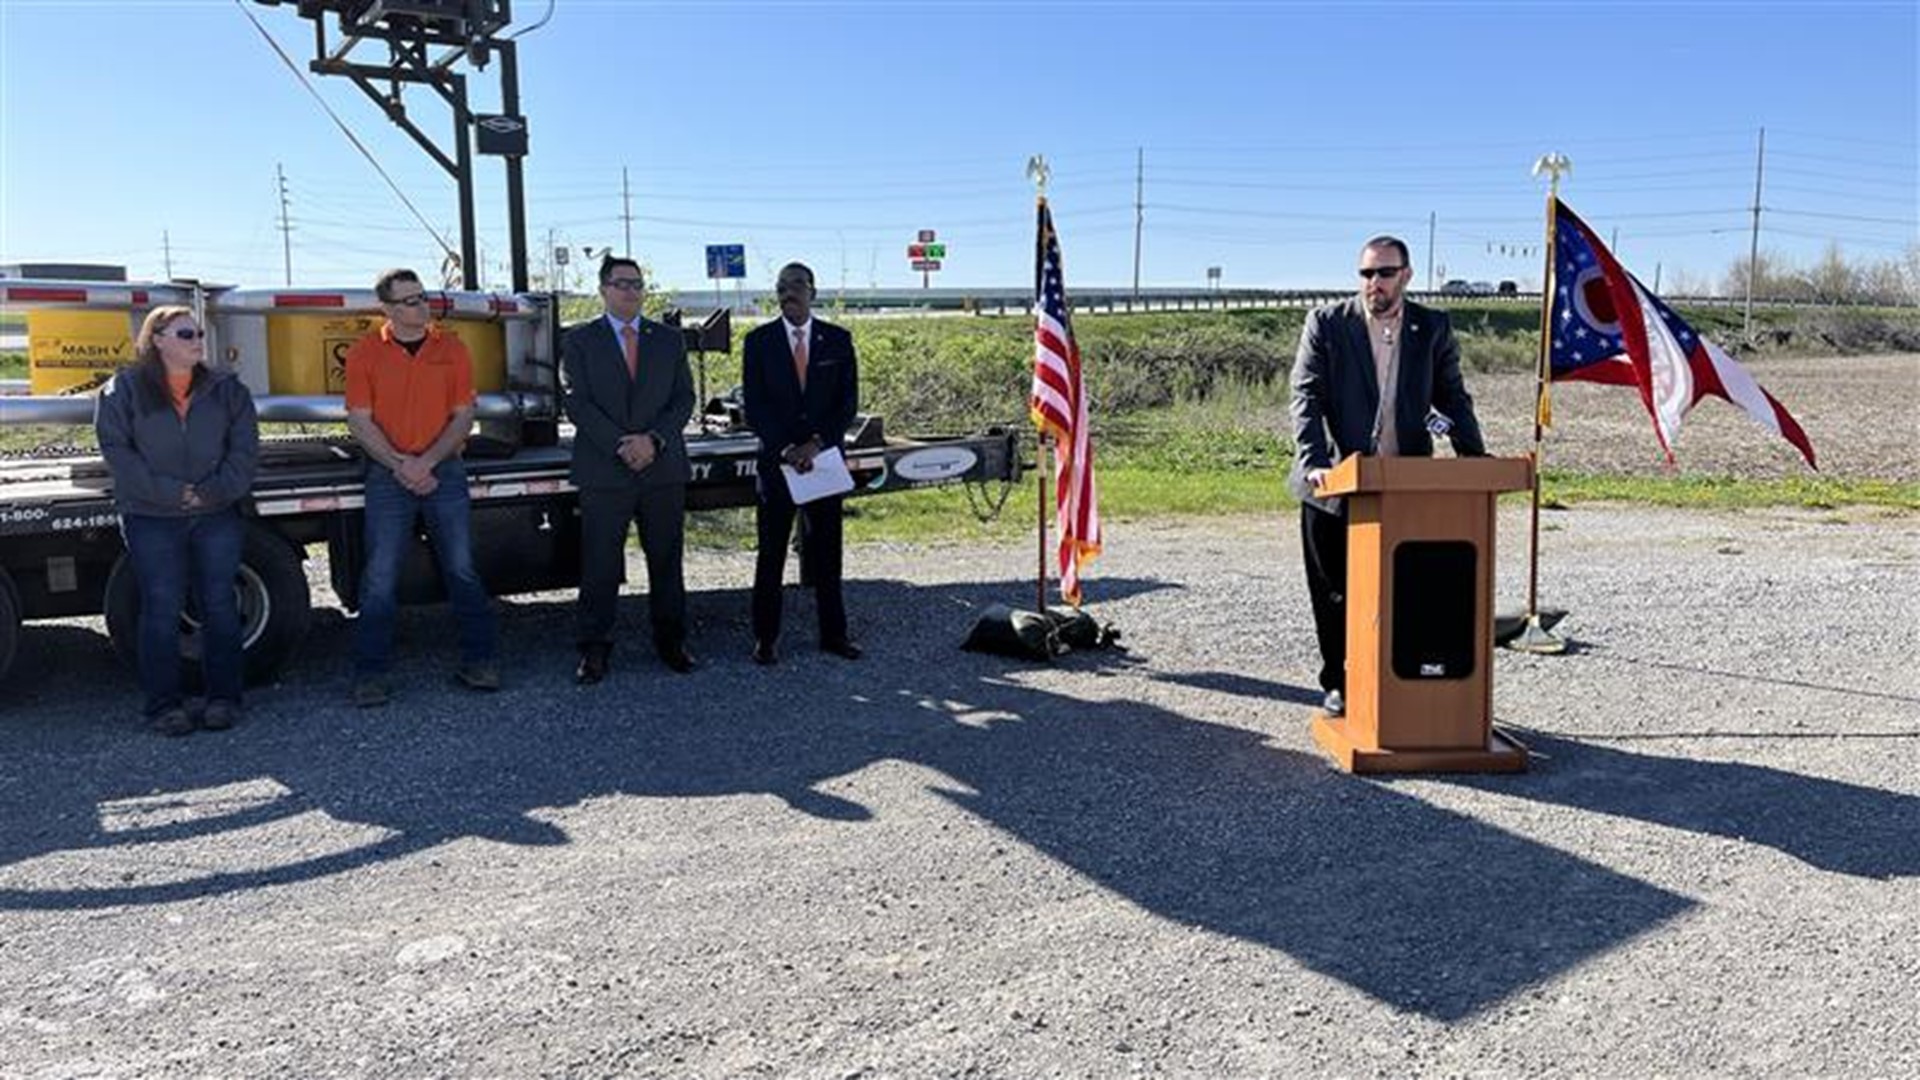 The $30.8 million County Road 99 project in Hancock County, the largest in northwest Ohio, will create a diverging diamond over I-75 just north of Findlay.